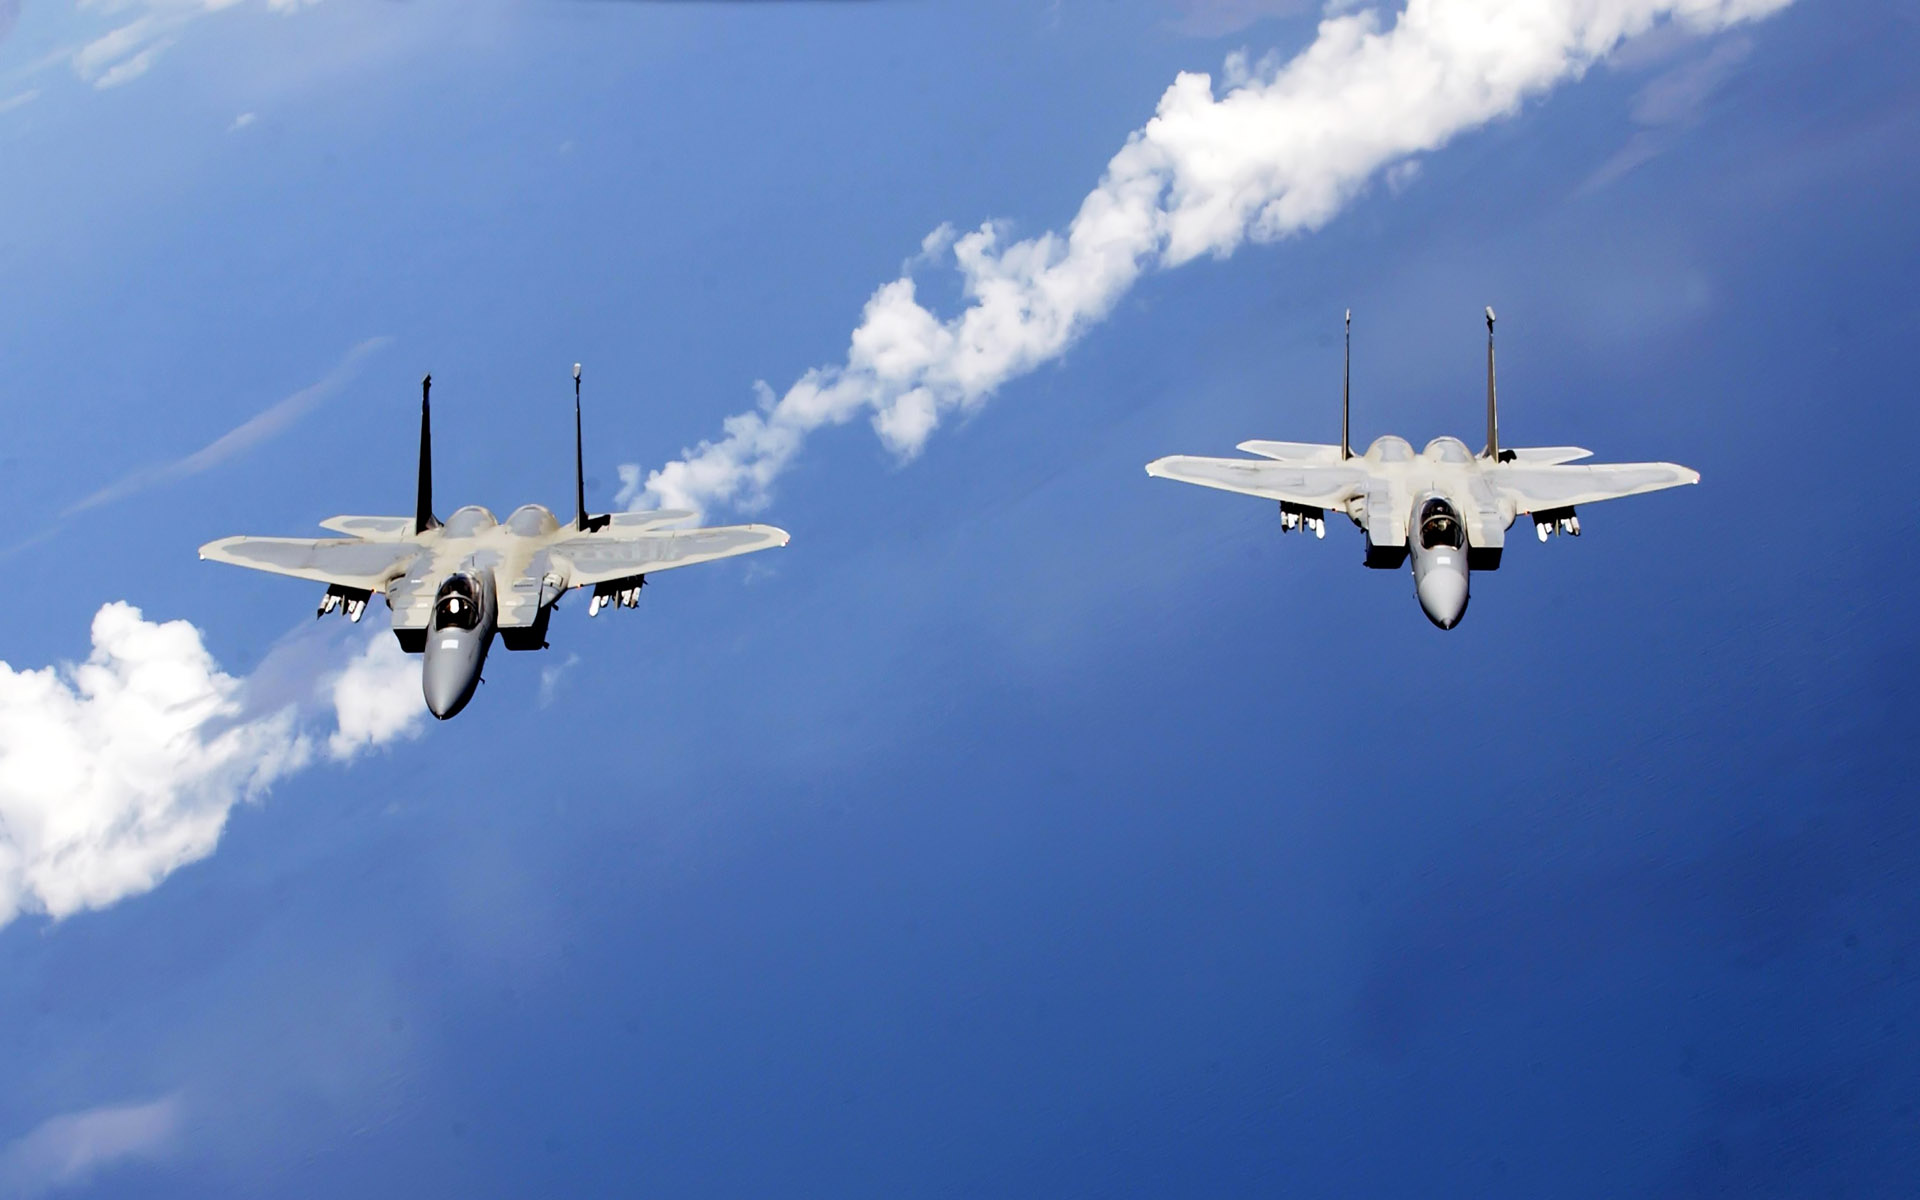 Military aircraft / fighter aircraft in the sky wallpapers 